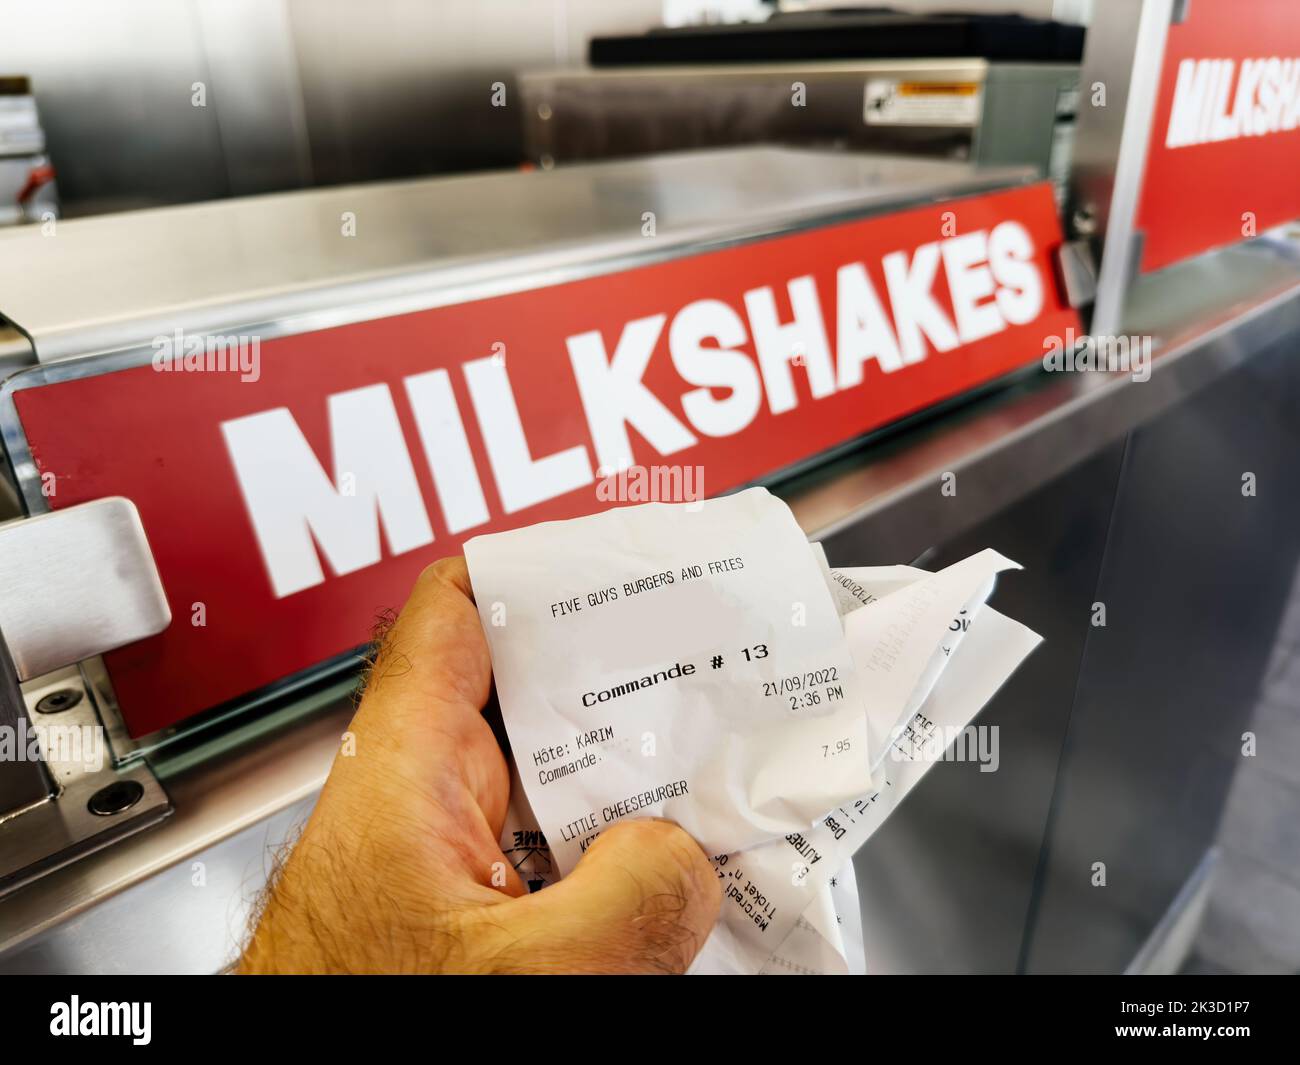 Paris, France - Sep 21, 2022: Five Guys American fast food restaurant with customer holding receipt in front of milkshakes logo - chain with focused on hamburgers, hot dogs, and French fries, and headquartered in Lorton, Virginia, part of Fairfax County. Stock Photo